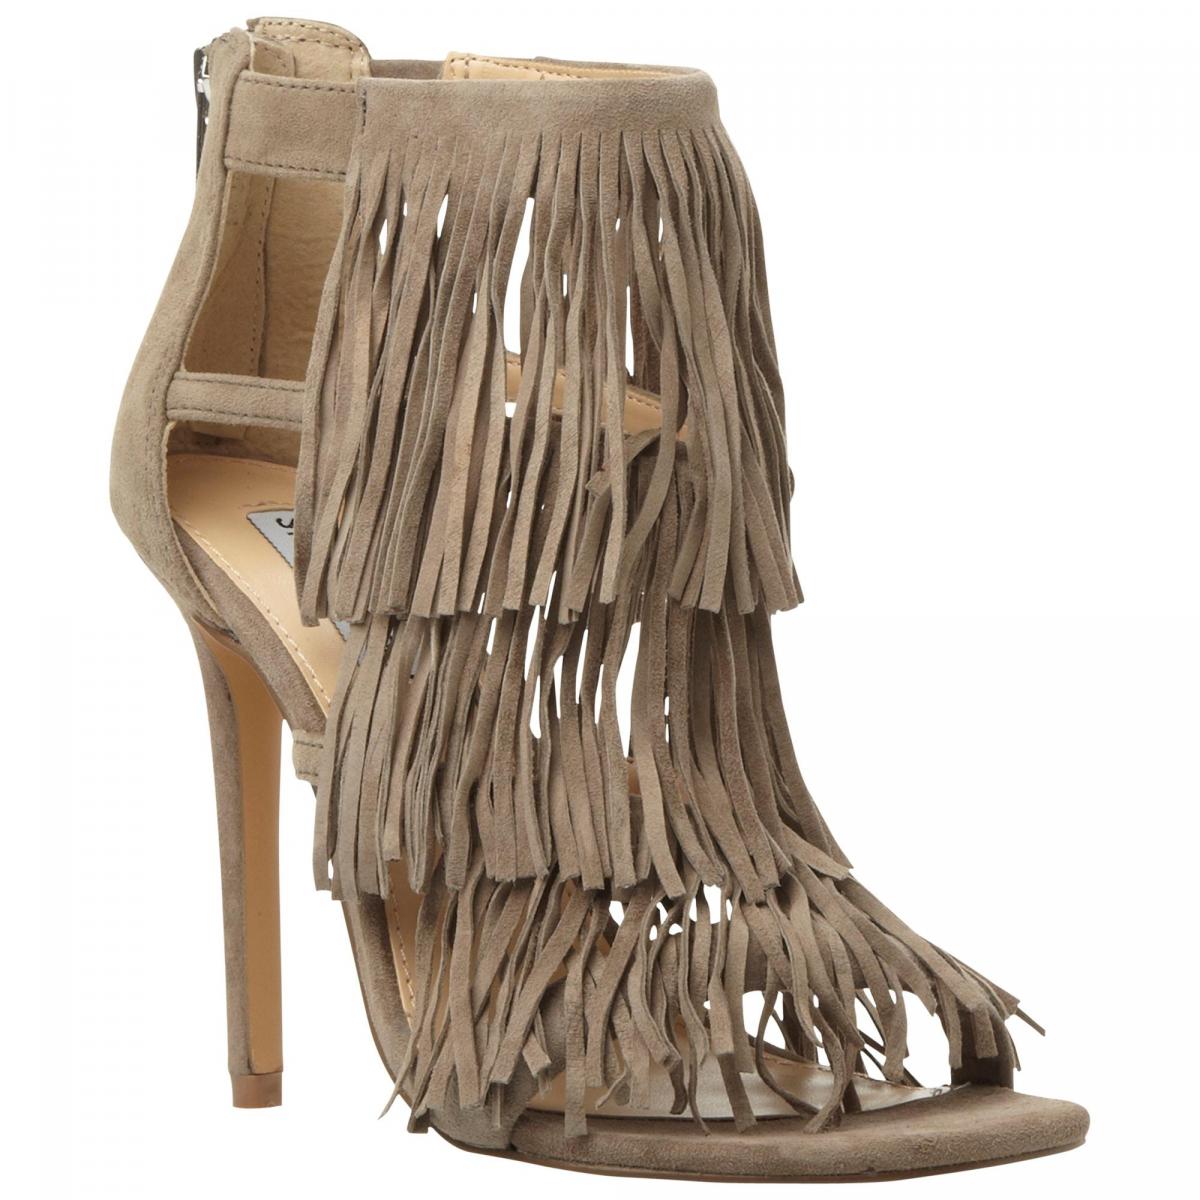 Steve Madden in John Lewis, Fringly suede fringed court shoes, taupe, £79